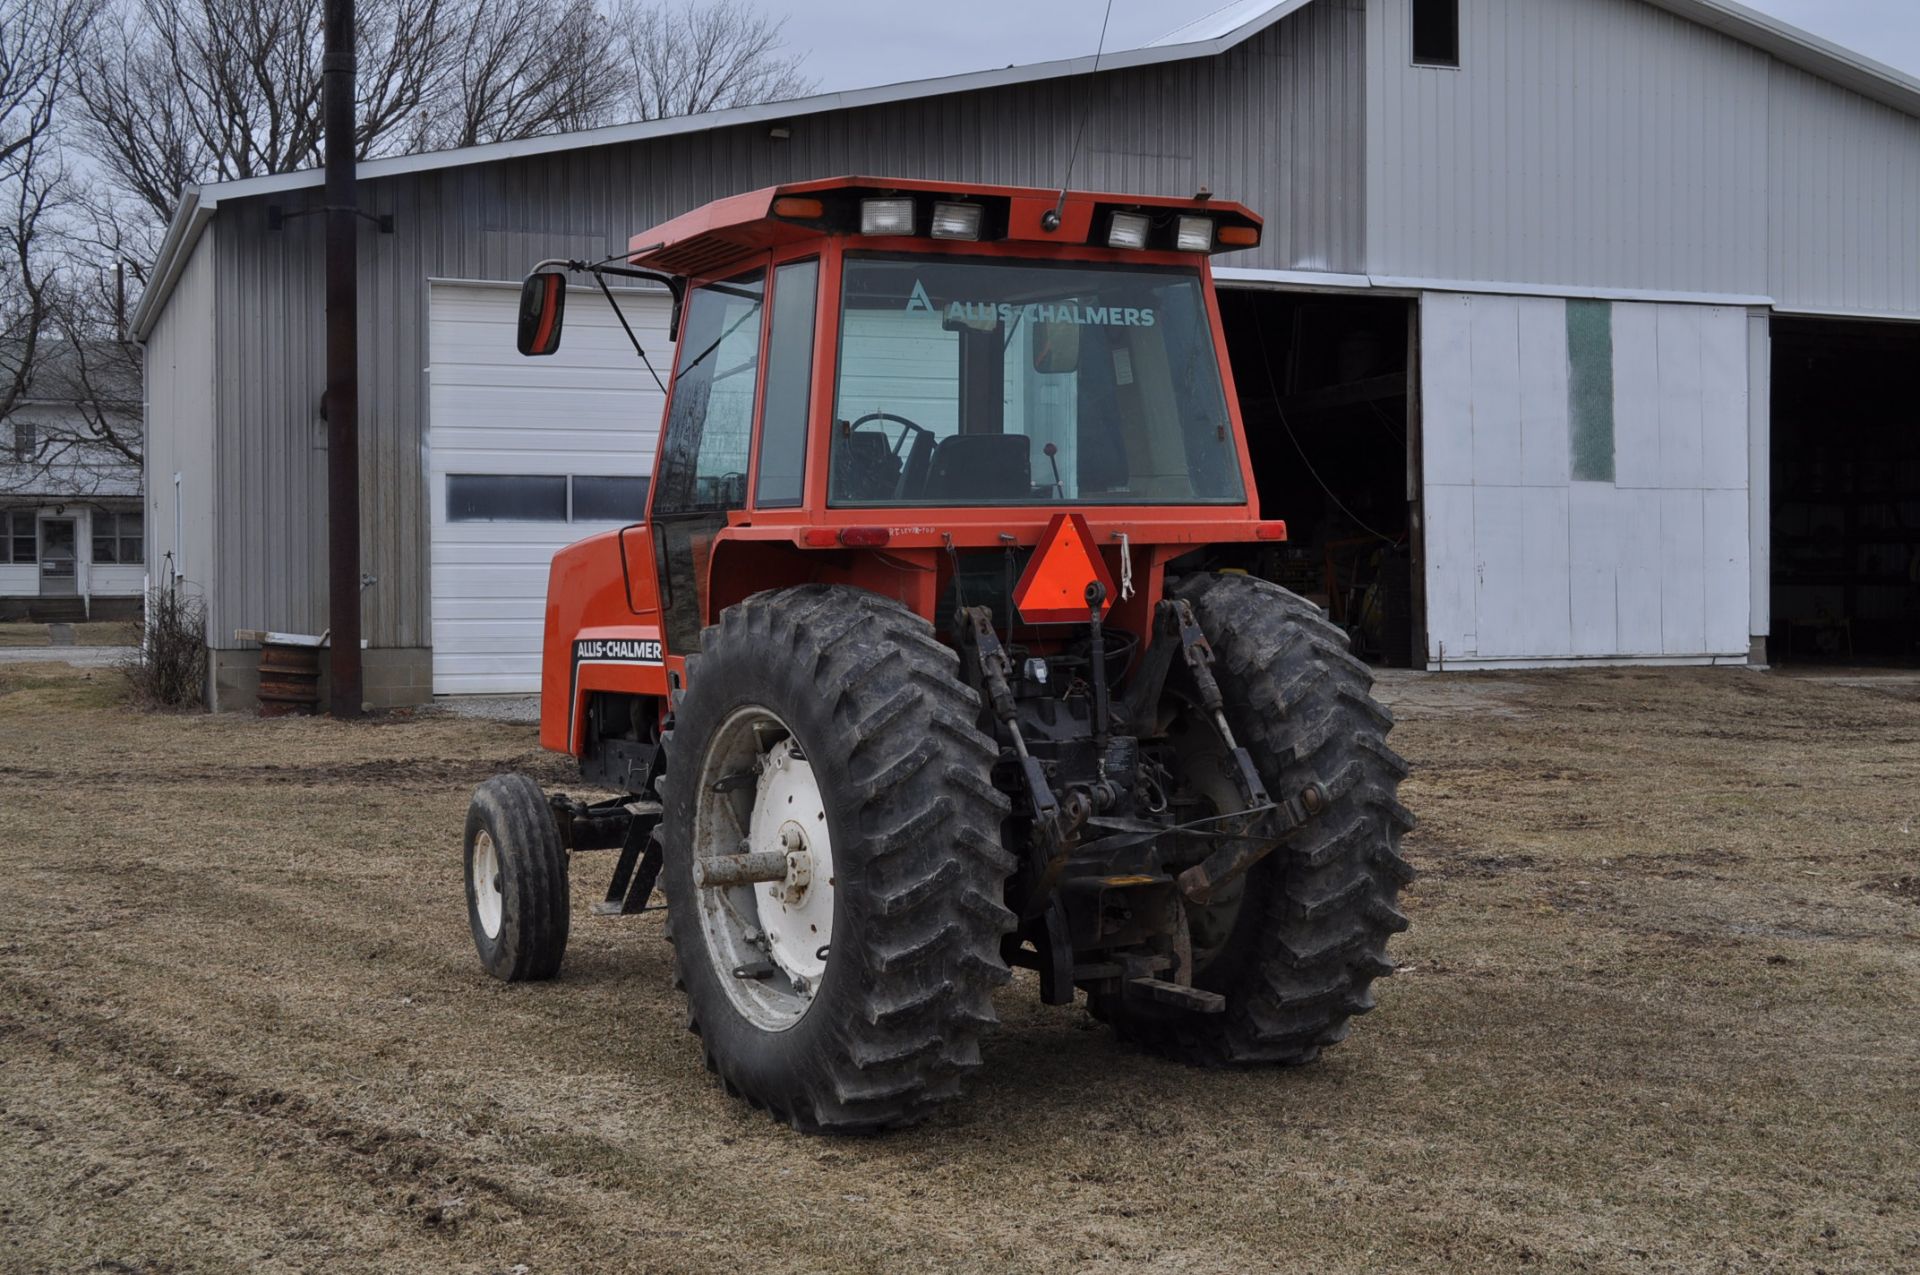 1982 Allis Chalmers 8010 tractor, power direct 20 spd, CHA, 2 remotes,540/1000 PTO, 3pt, 18.4 x 38 - Image 2 of 28